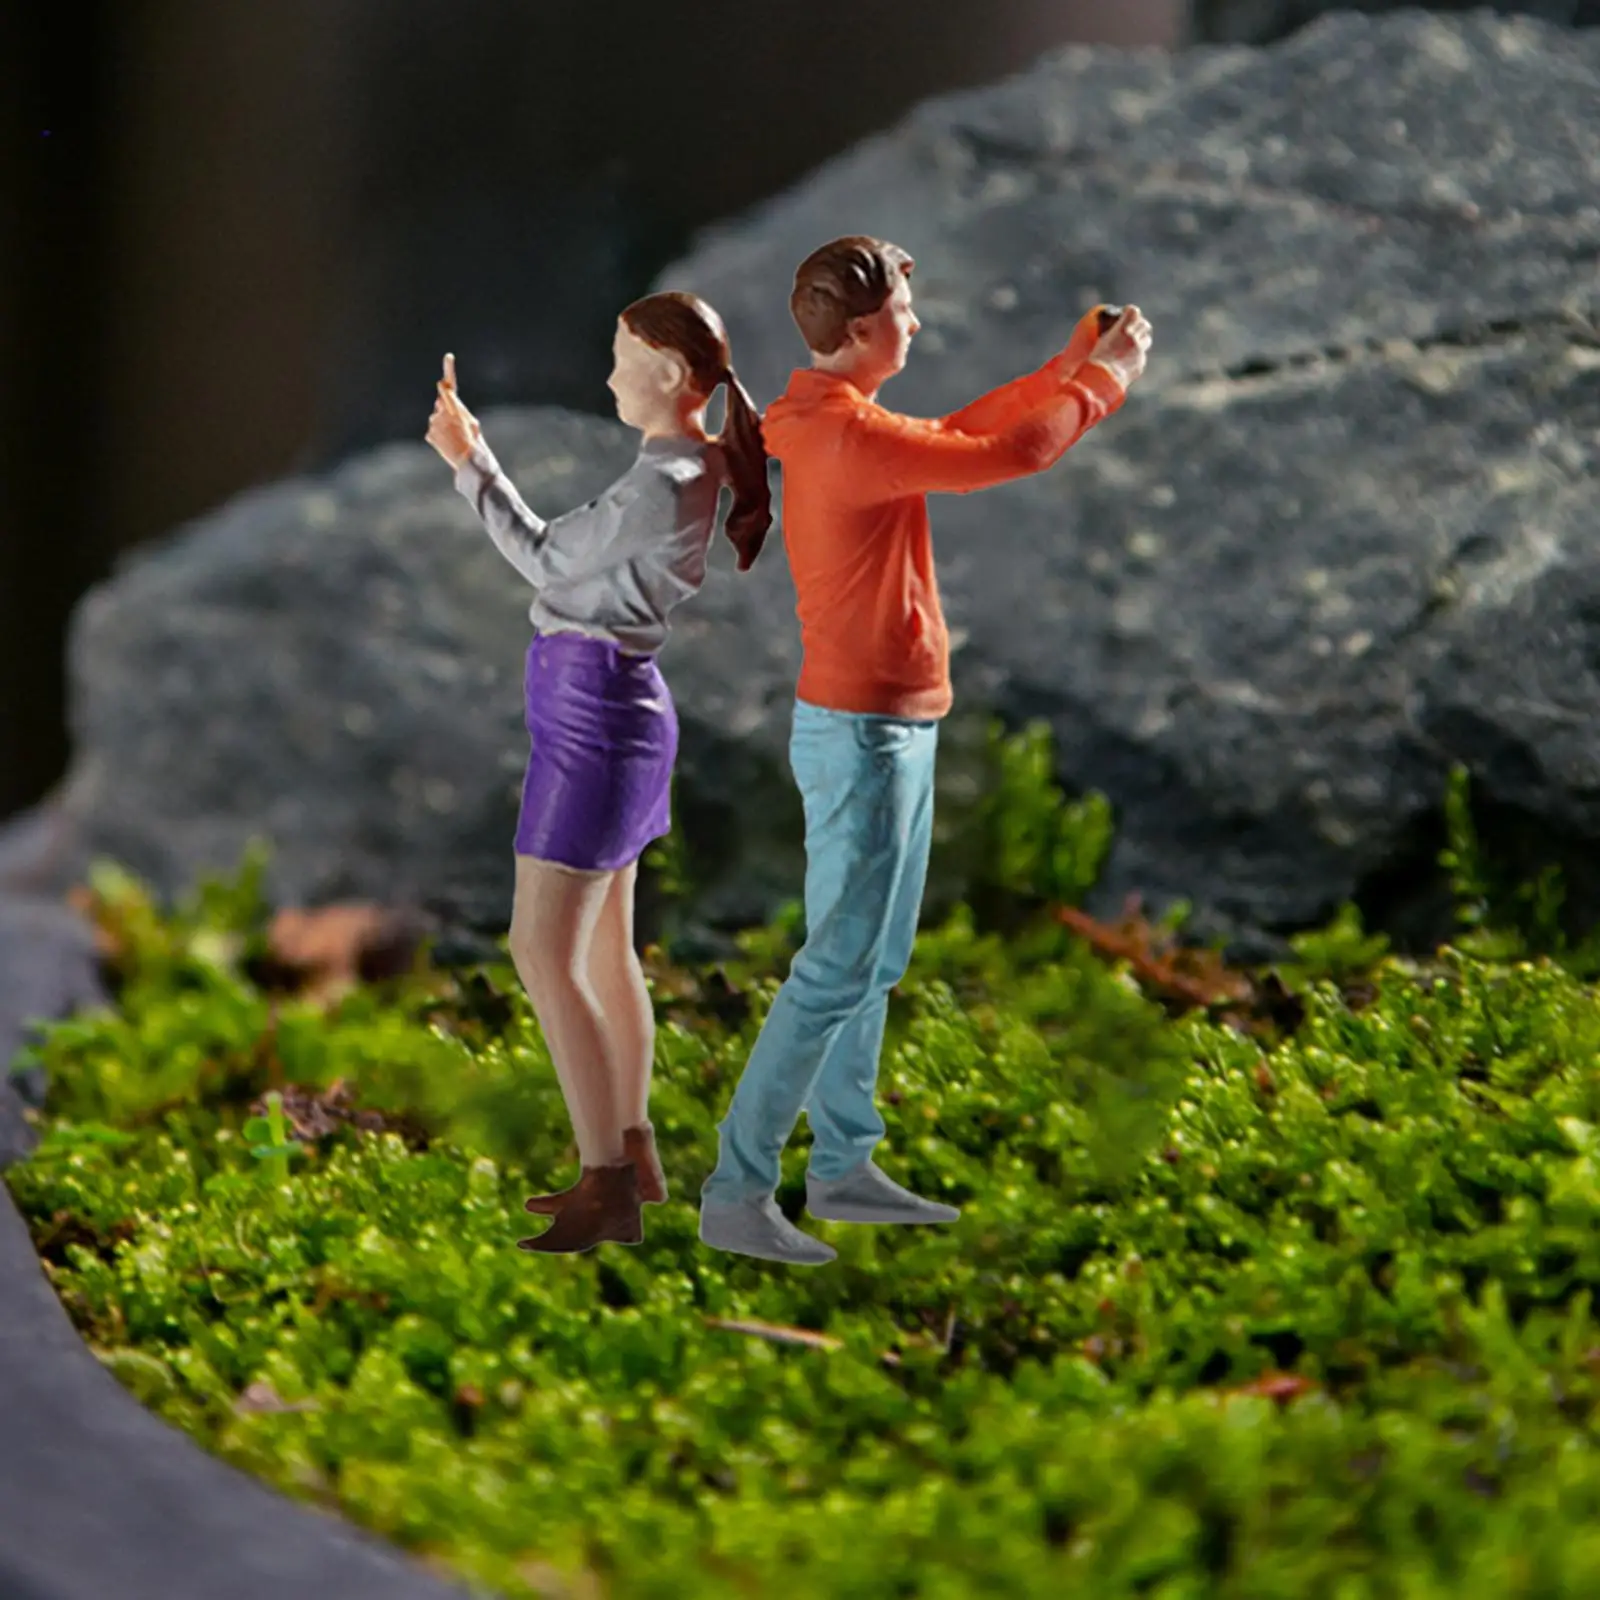 2 Pieces Simulation 1/64 Couple Figures Collection Street Couple Figures for Dollhouse Photography Props DIY Scene Diorama Decor